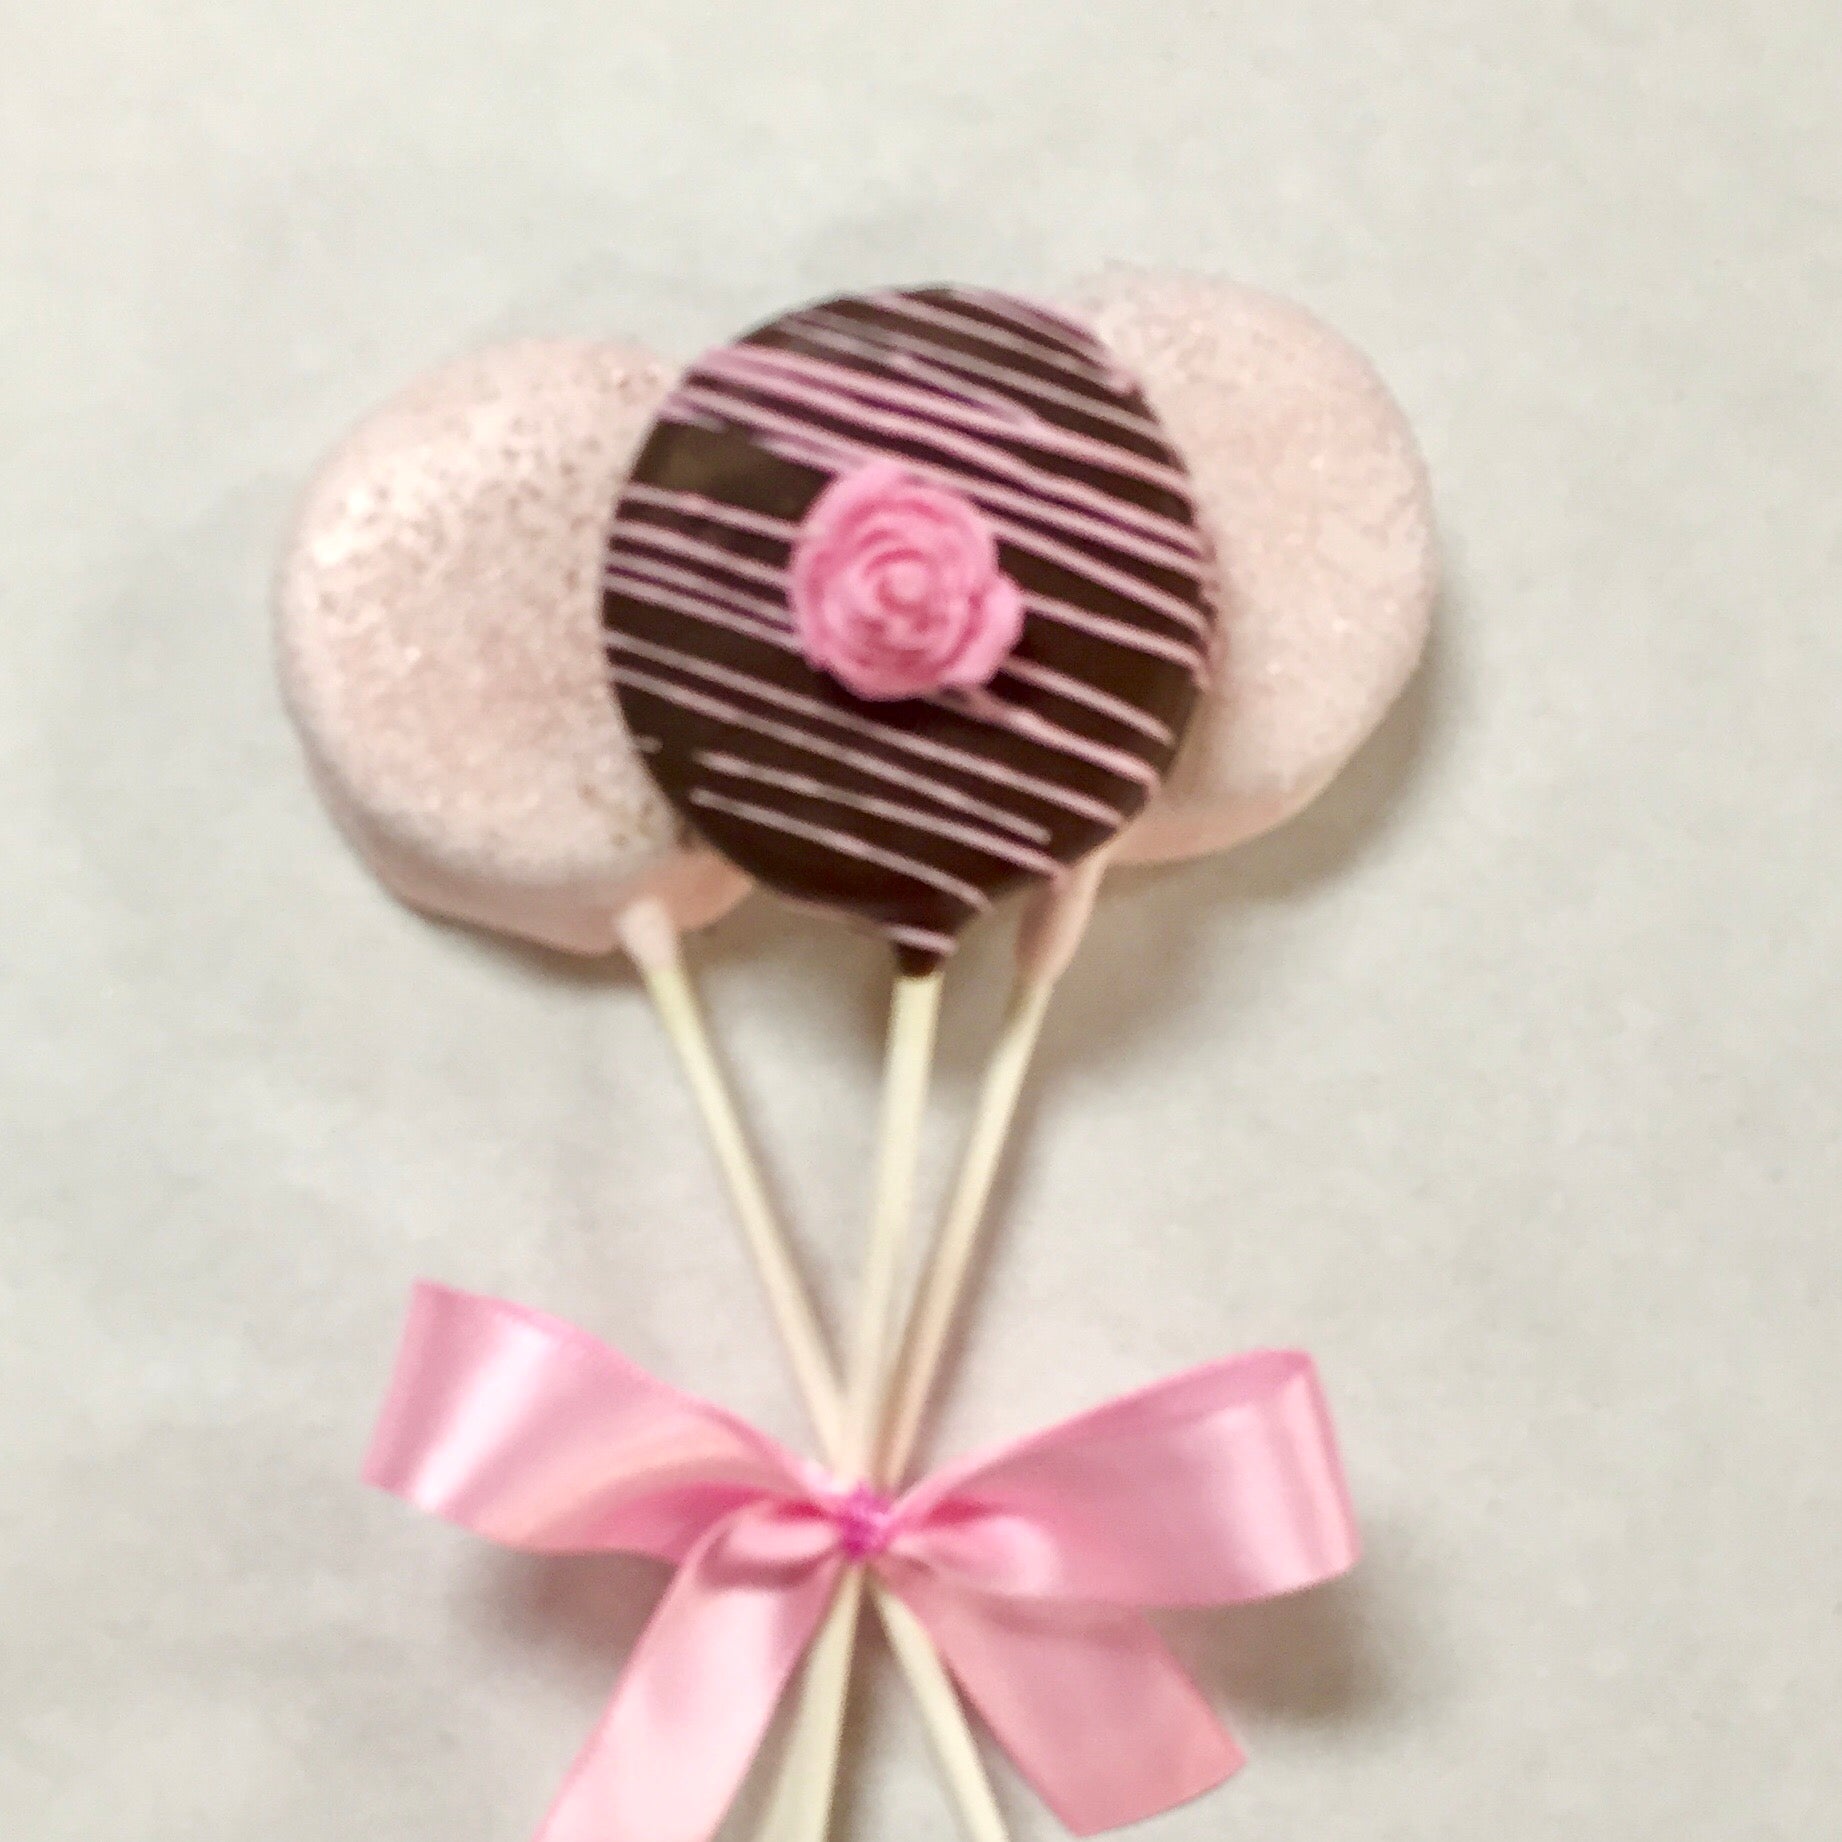 Chocolate covered Oreo with light pink drizzle and chocolate rose and 2 light pink covered Oreos with sanding sugar wrapped as a trio